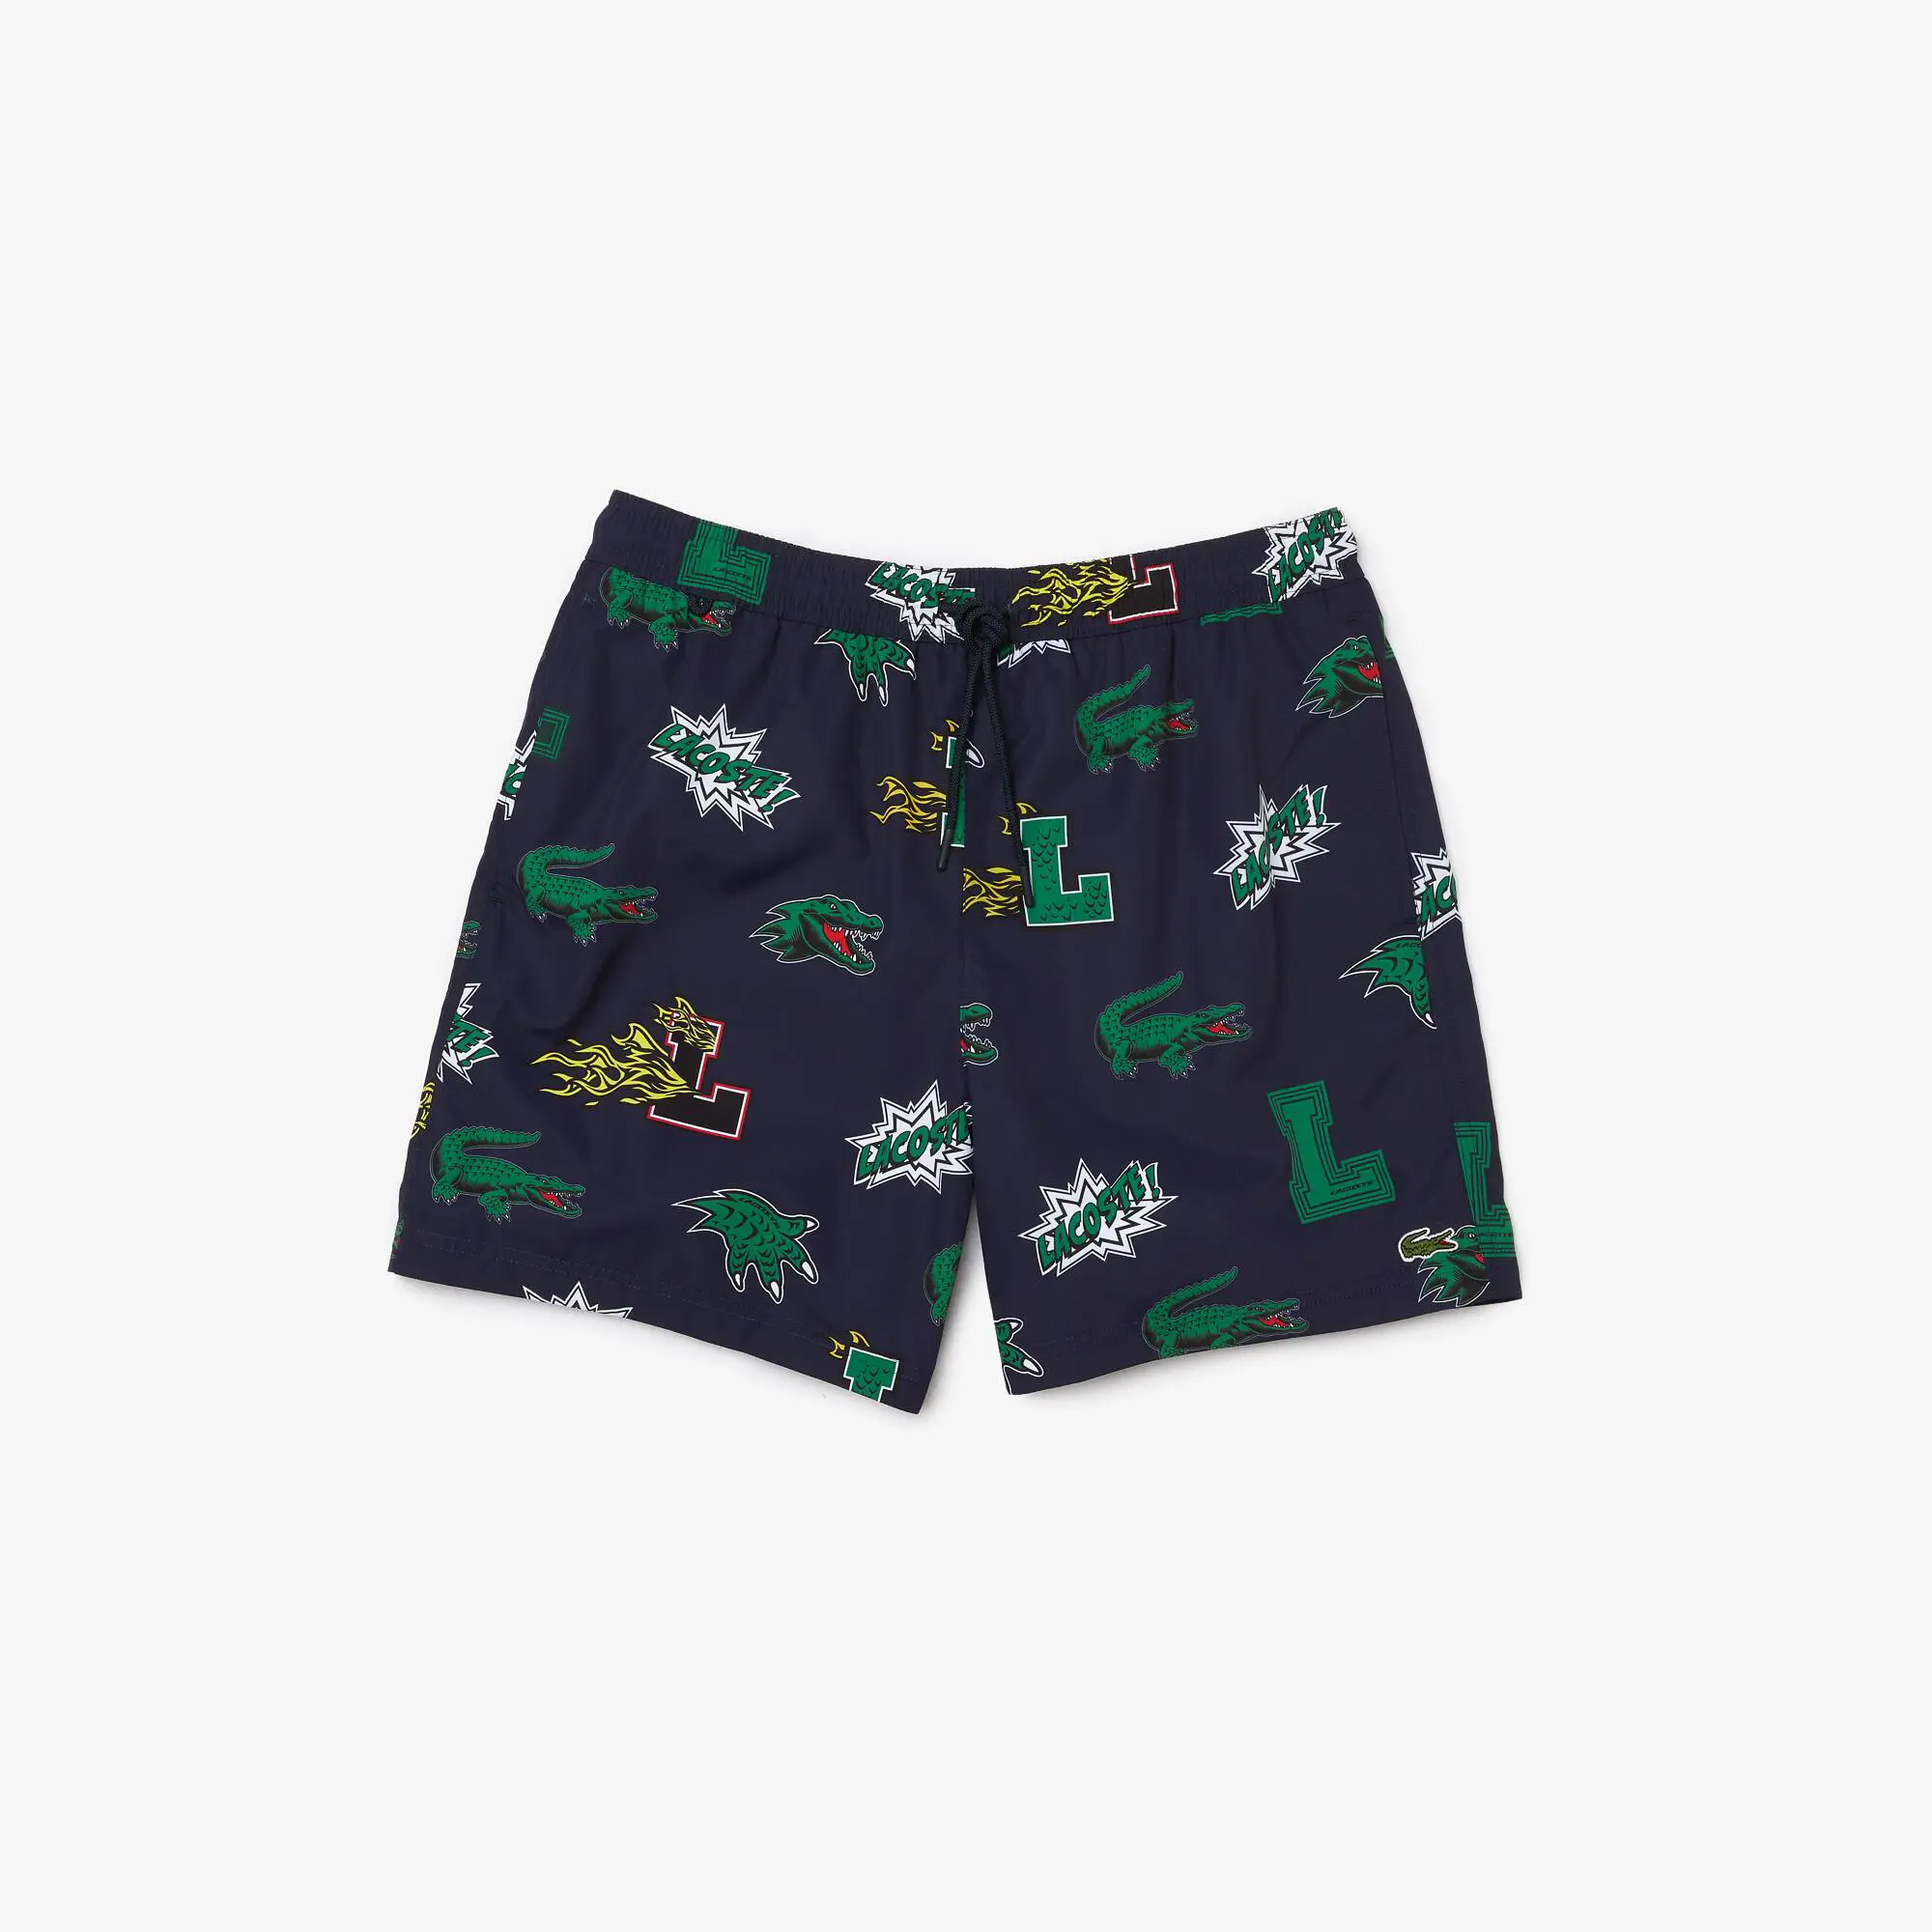 Lacoste Men's Lacoste Holiday Mesh Lined Swimming Trunks. 2